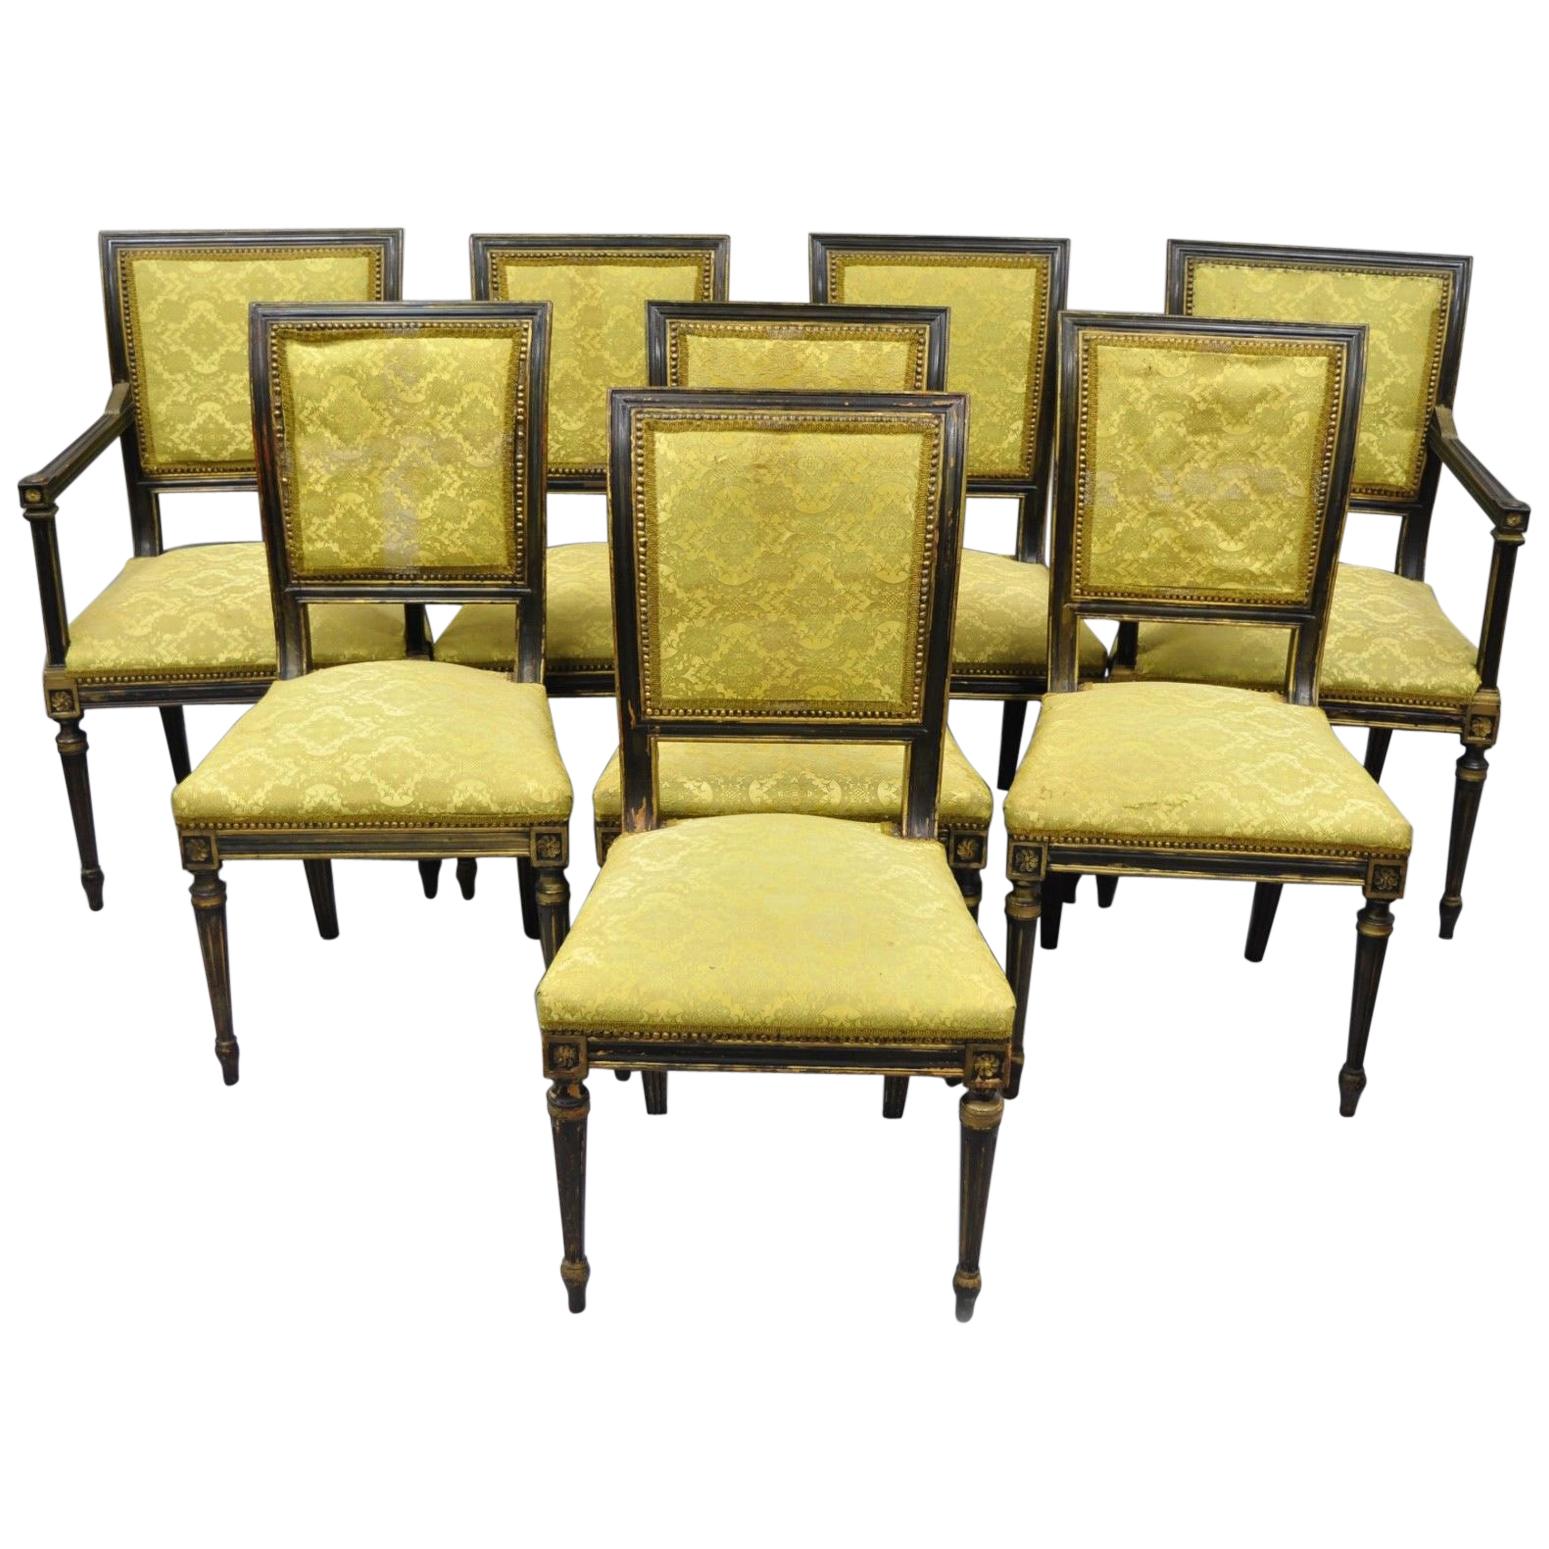 Eight French Regency Style Upholstered Square Back Dining Chairs